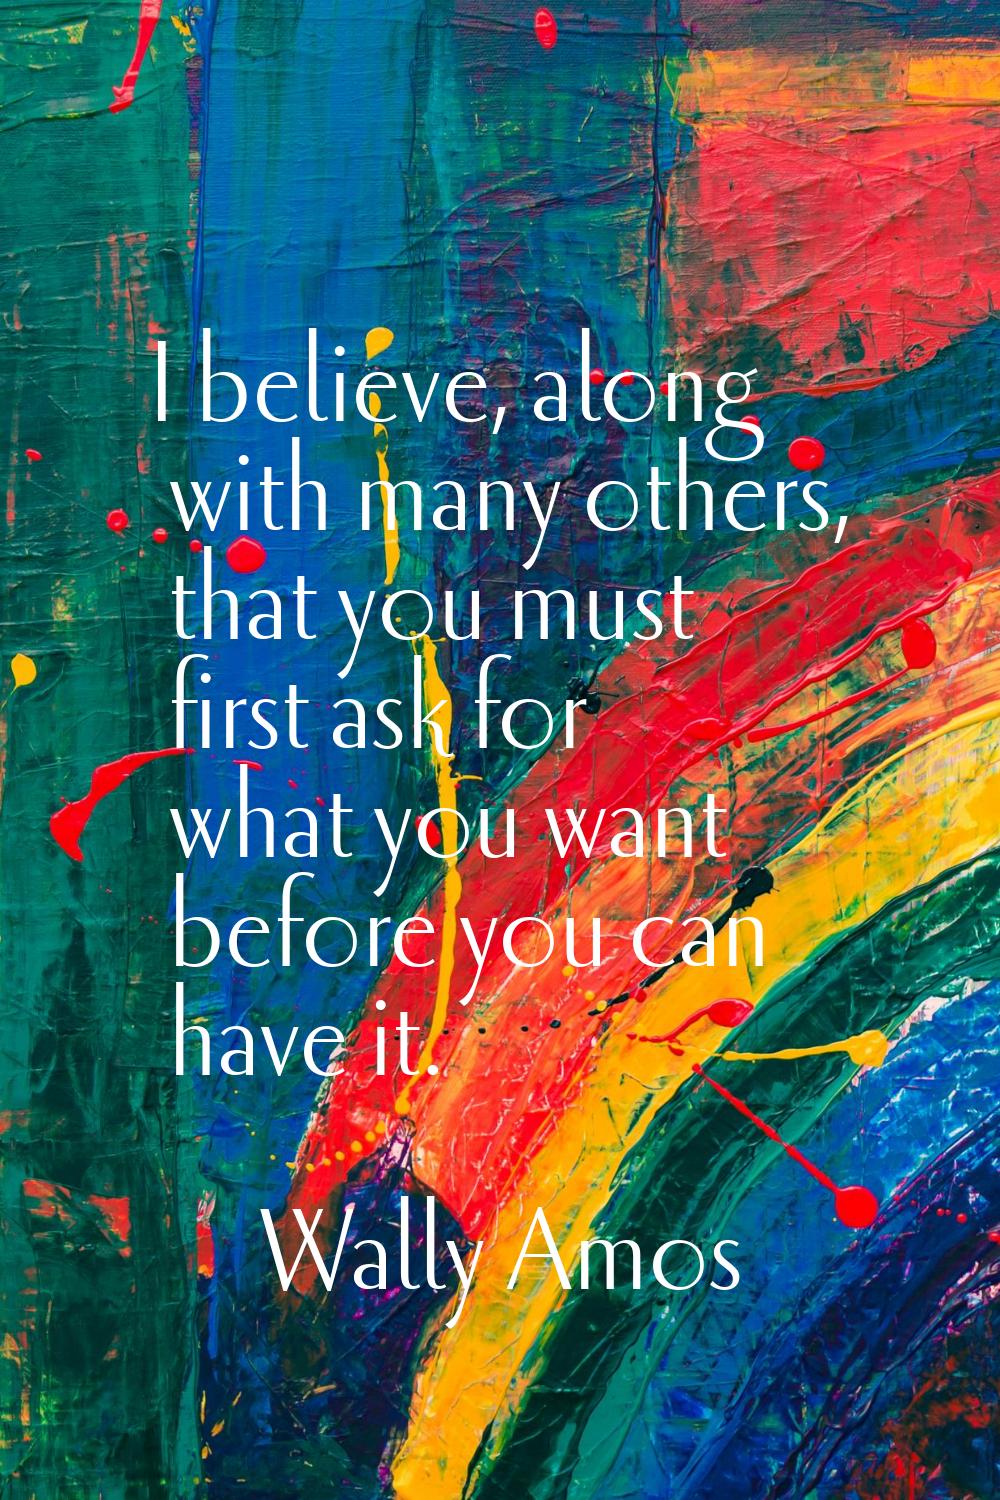 I believe, along with many others, that you must first ask for what you want before you can have it